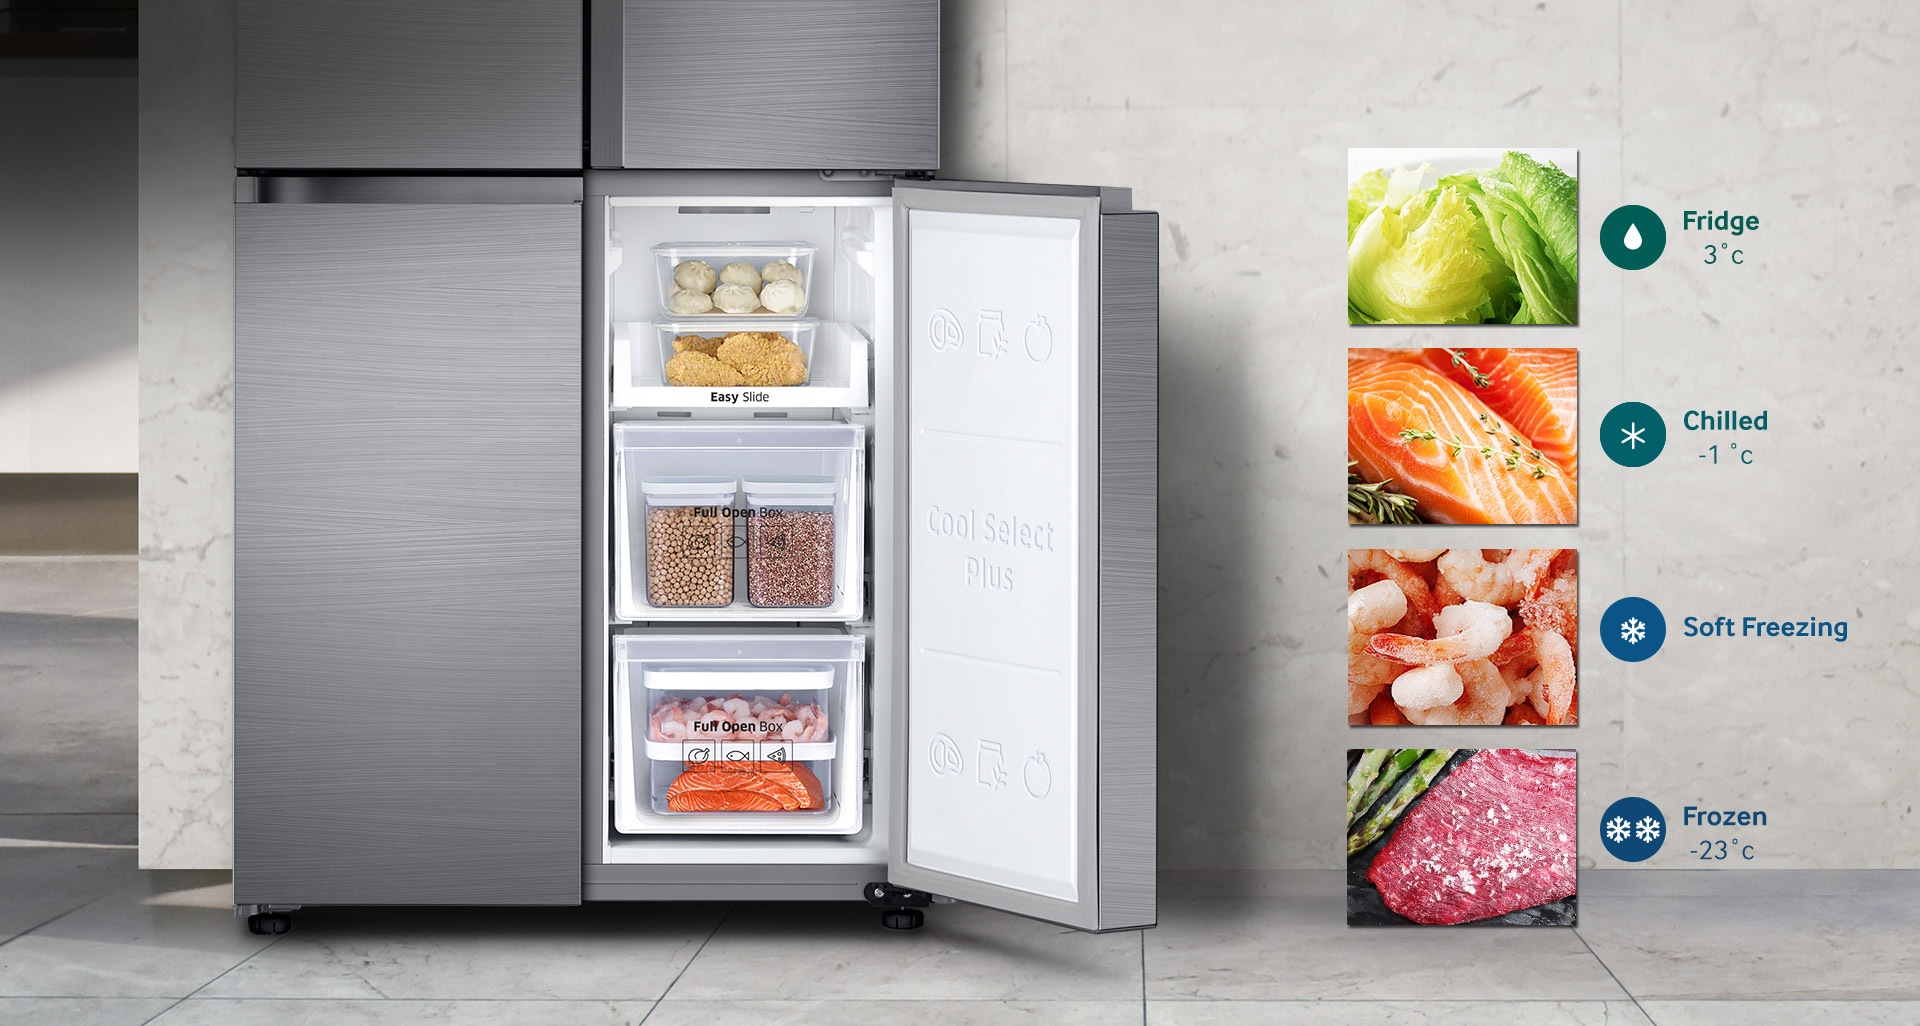 Samsung French Door Refrigerator with CoolSelect Plus Zone for Extra Storage